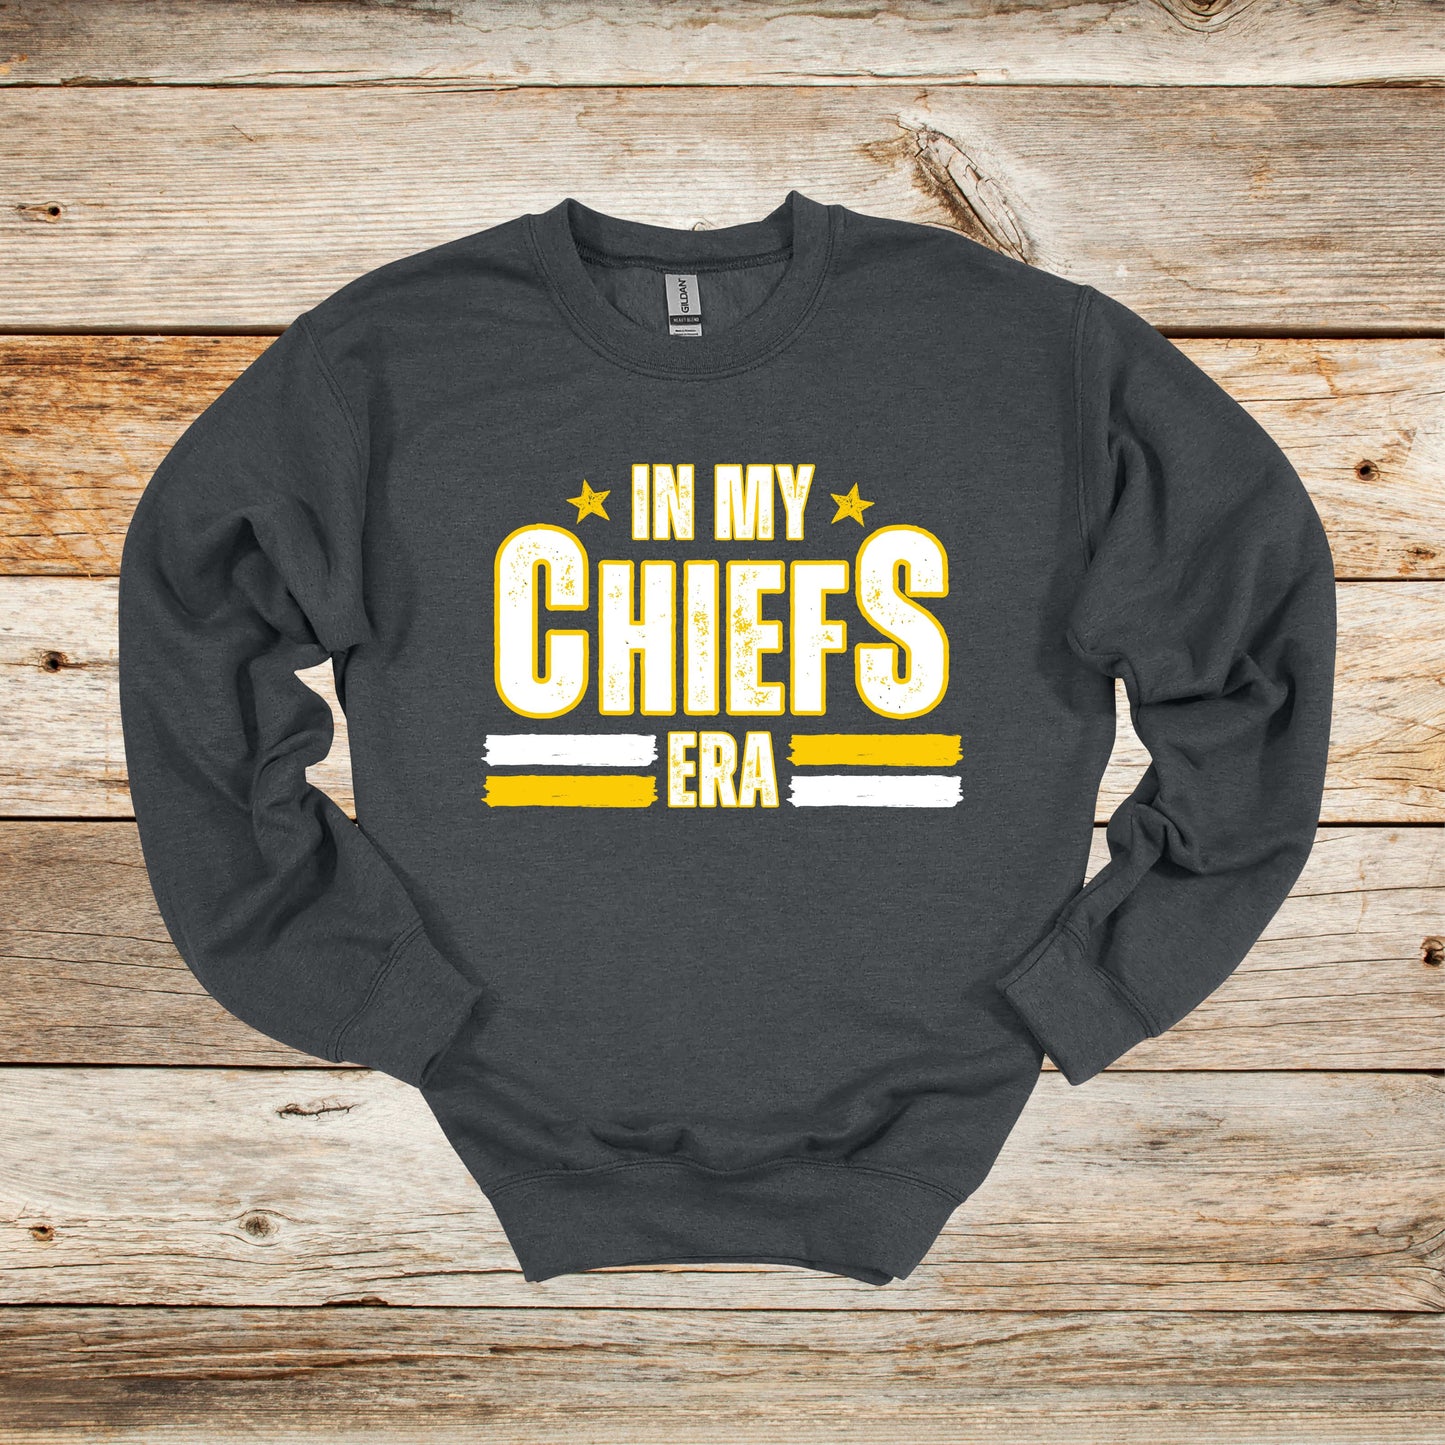 Football Crewneck and Hooded Sweatshirt - Chiefs Football - In My Chiefs Era - Adult and Children's Tee Shirts - Sports Hooded Sweatshirt Graphic Avenue Crewneck Sweatshirt Dark Heather Adult Small